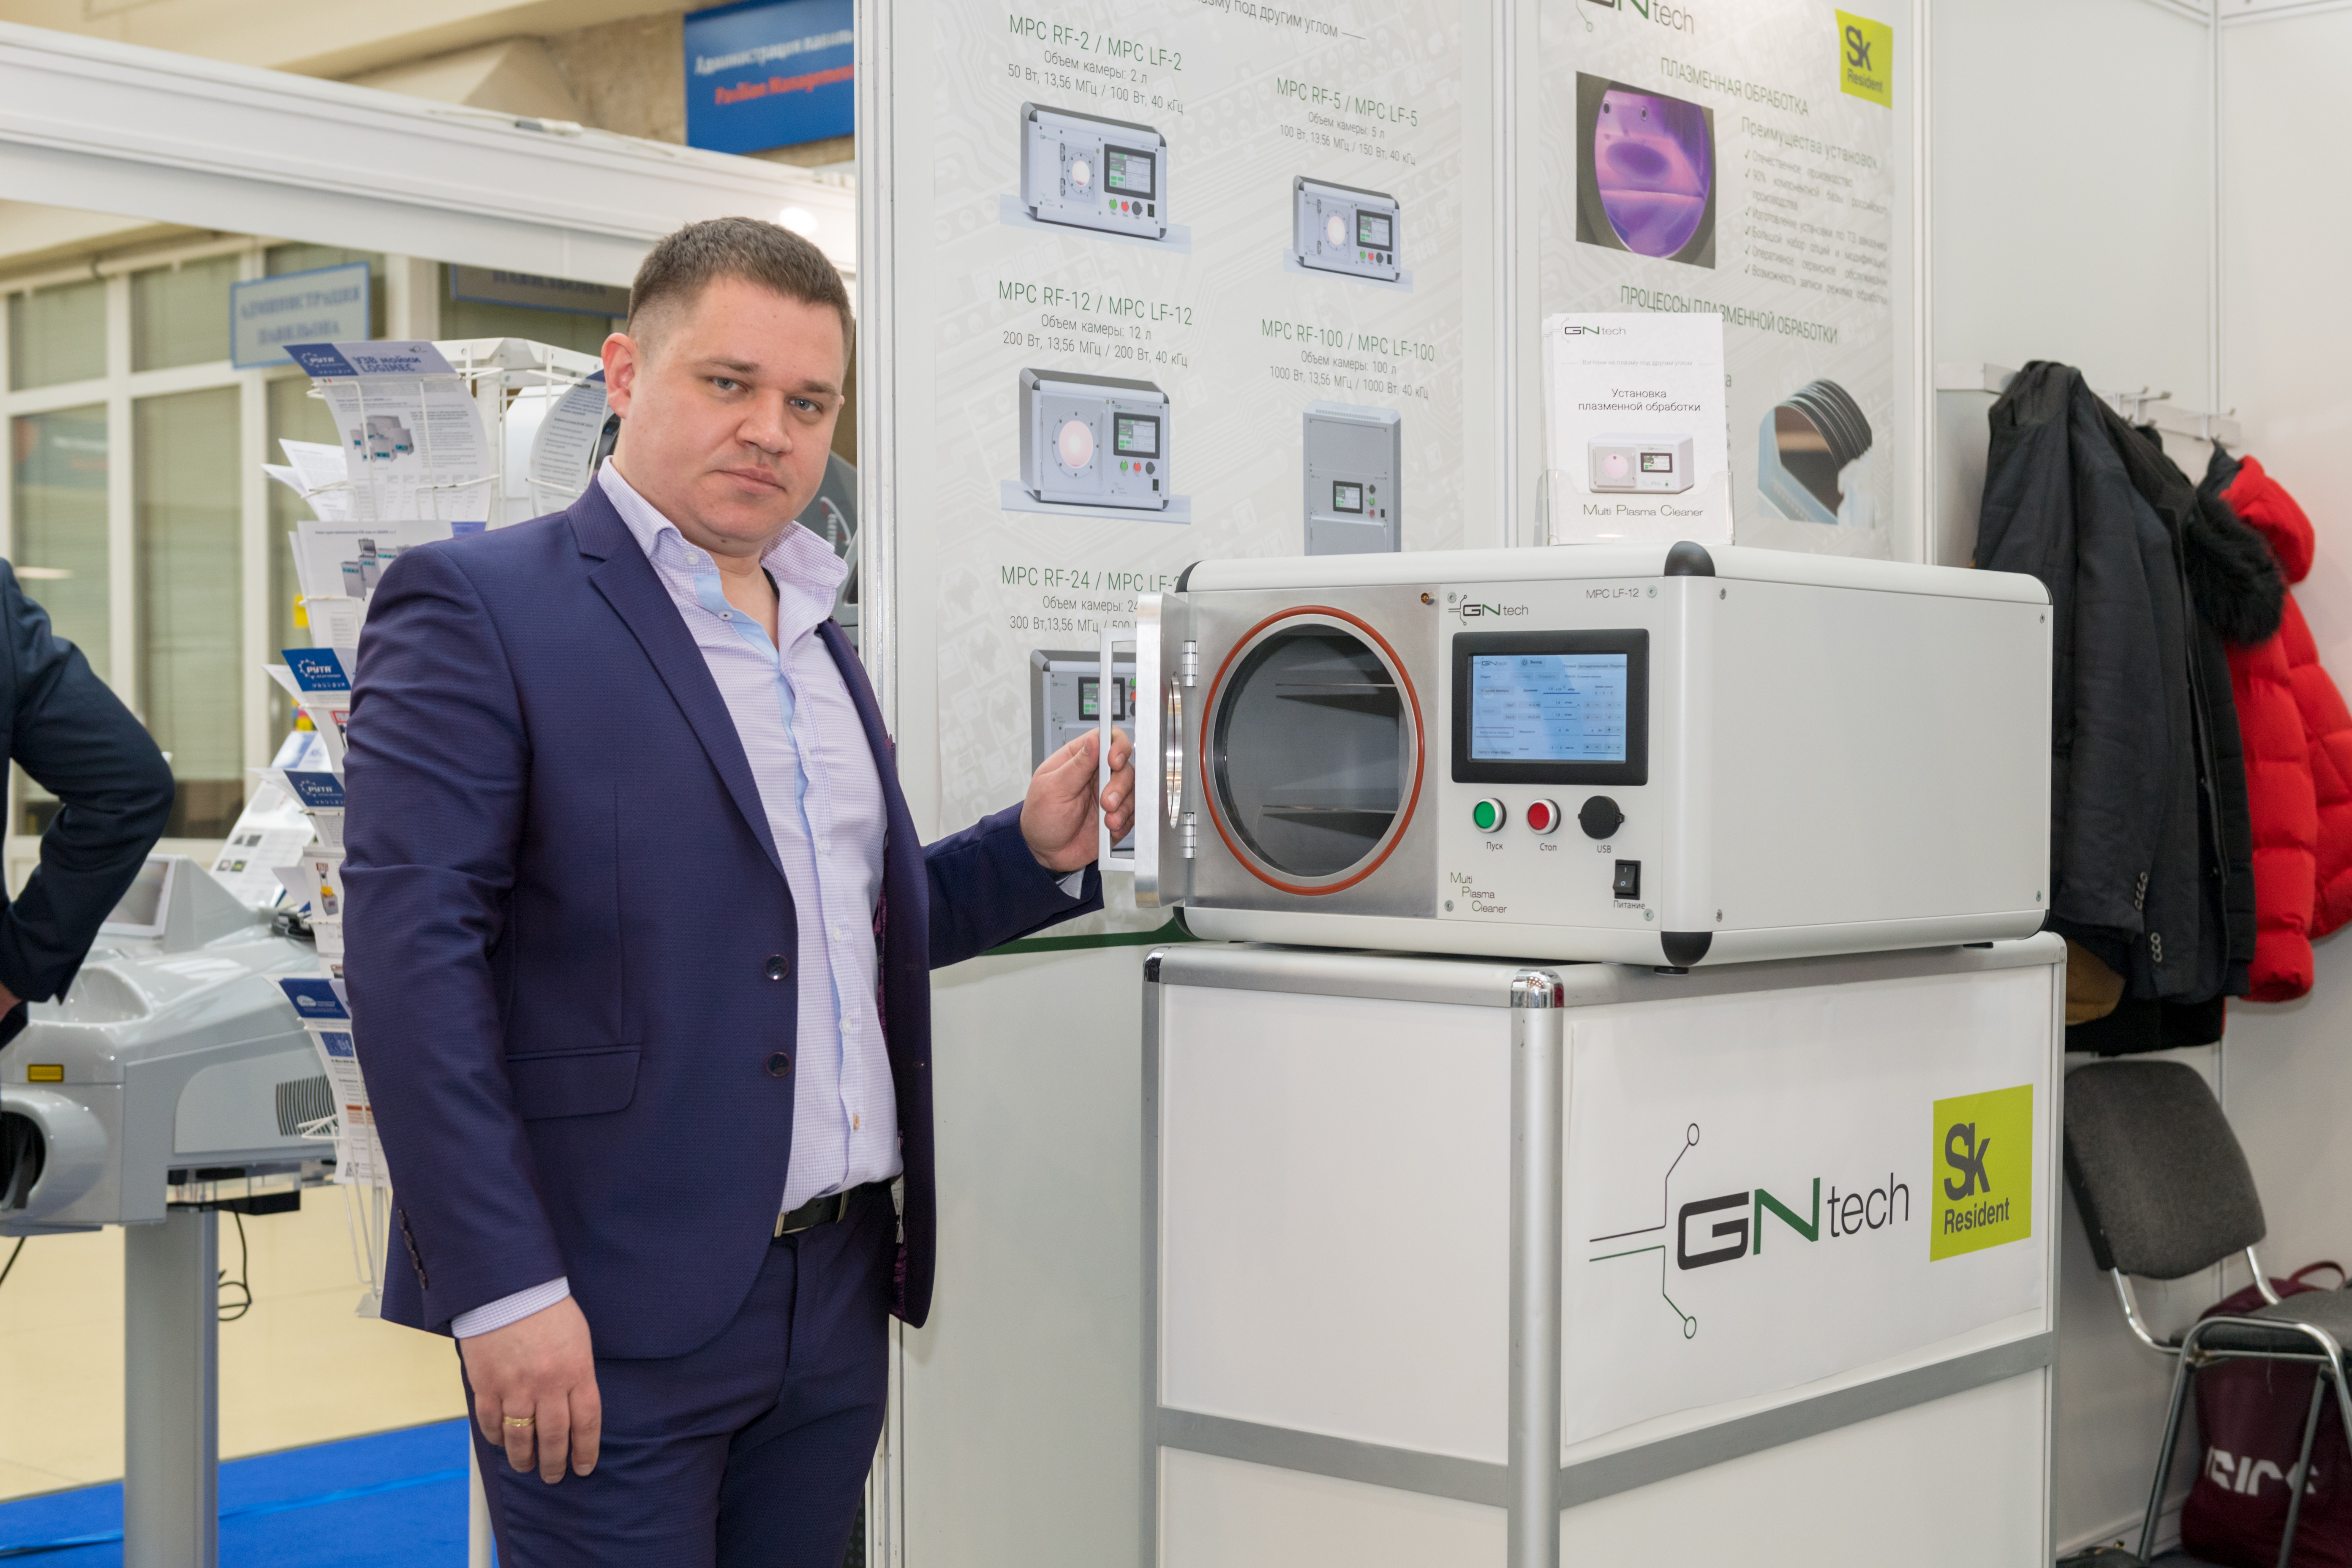 GN tech on the Photonics 2022 exhibition 